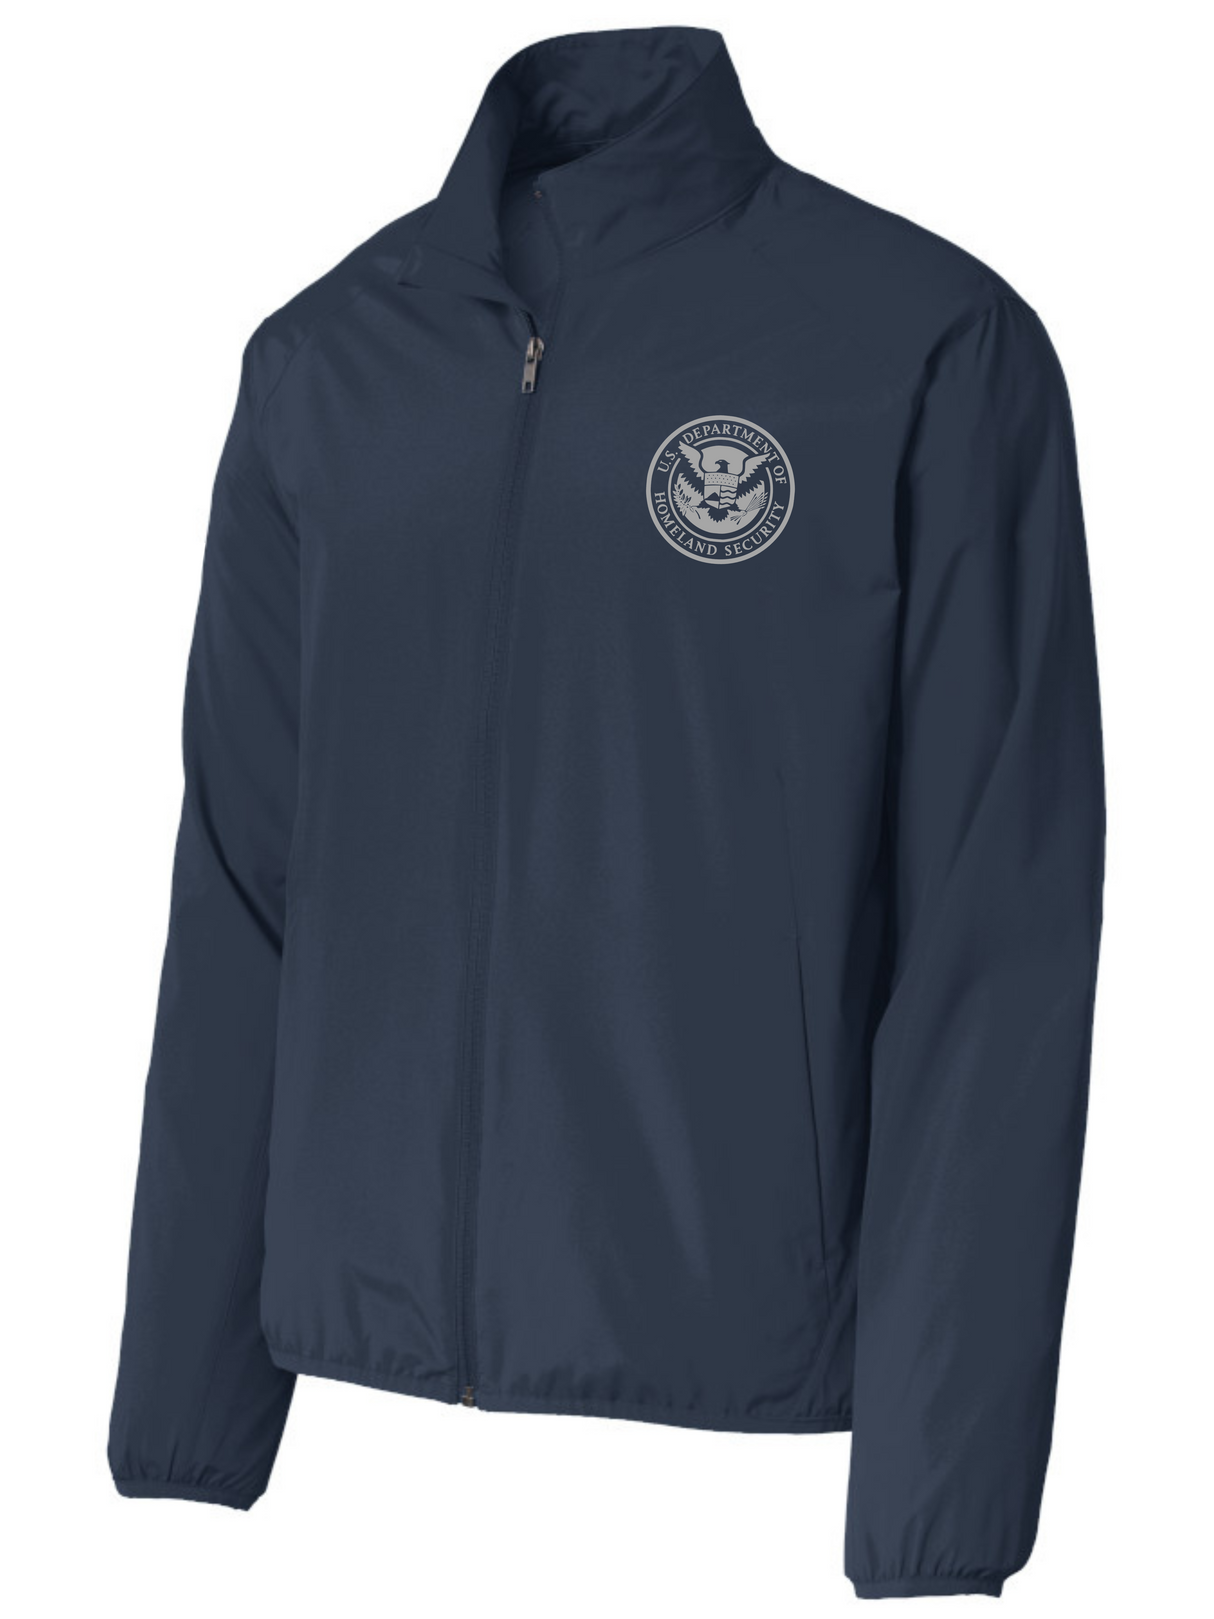 SUBDUED DHS POLICE Agency Identifier Jacket - FEDS Apparel